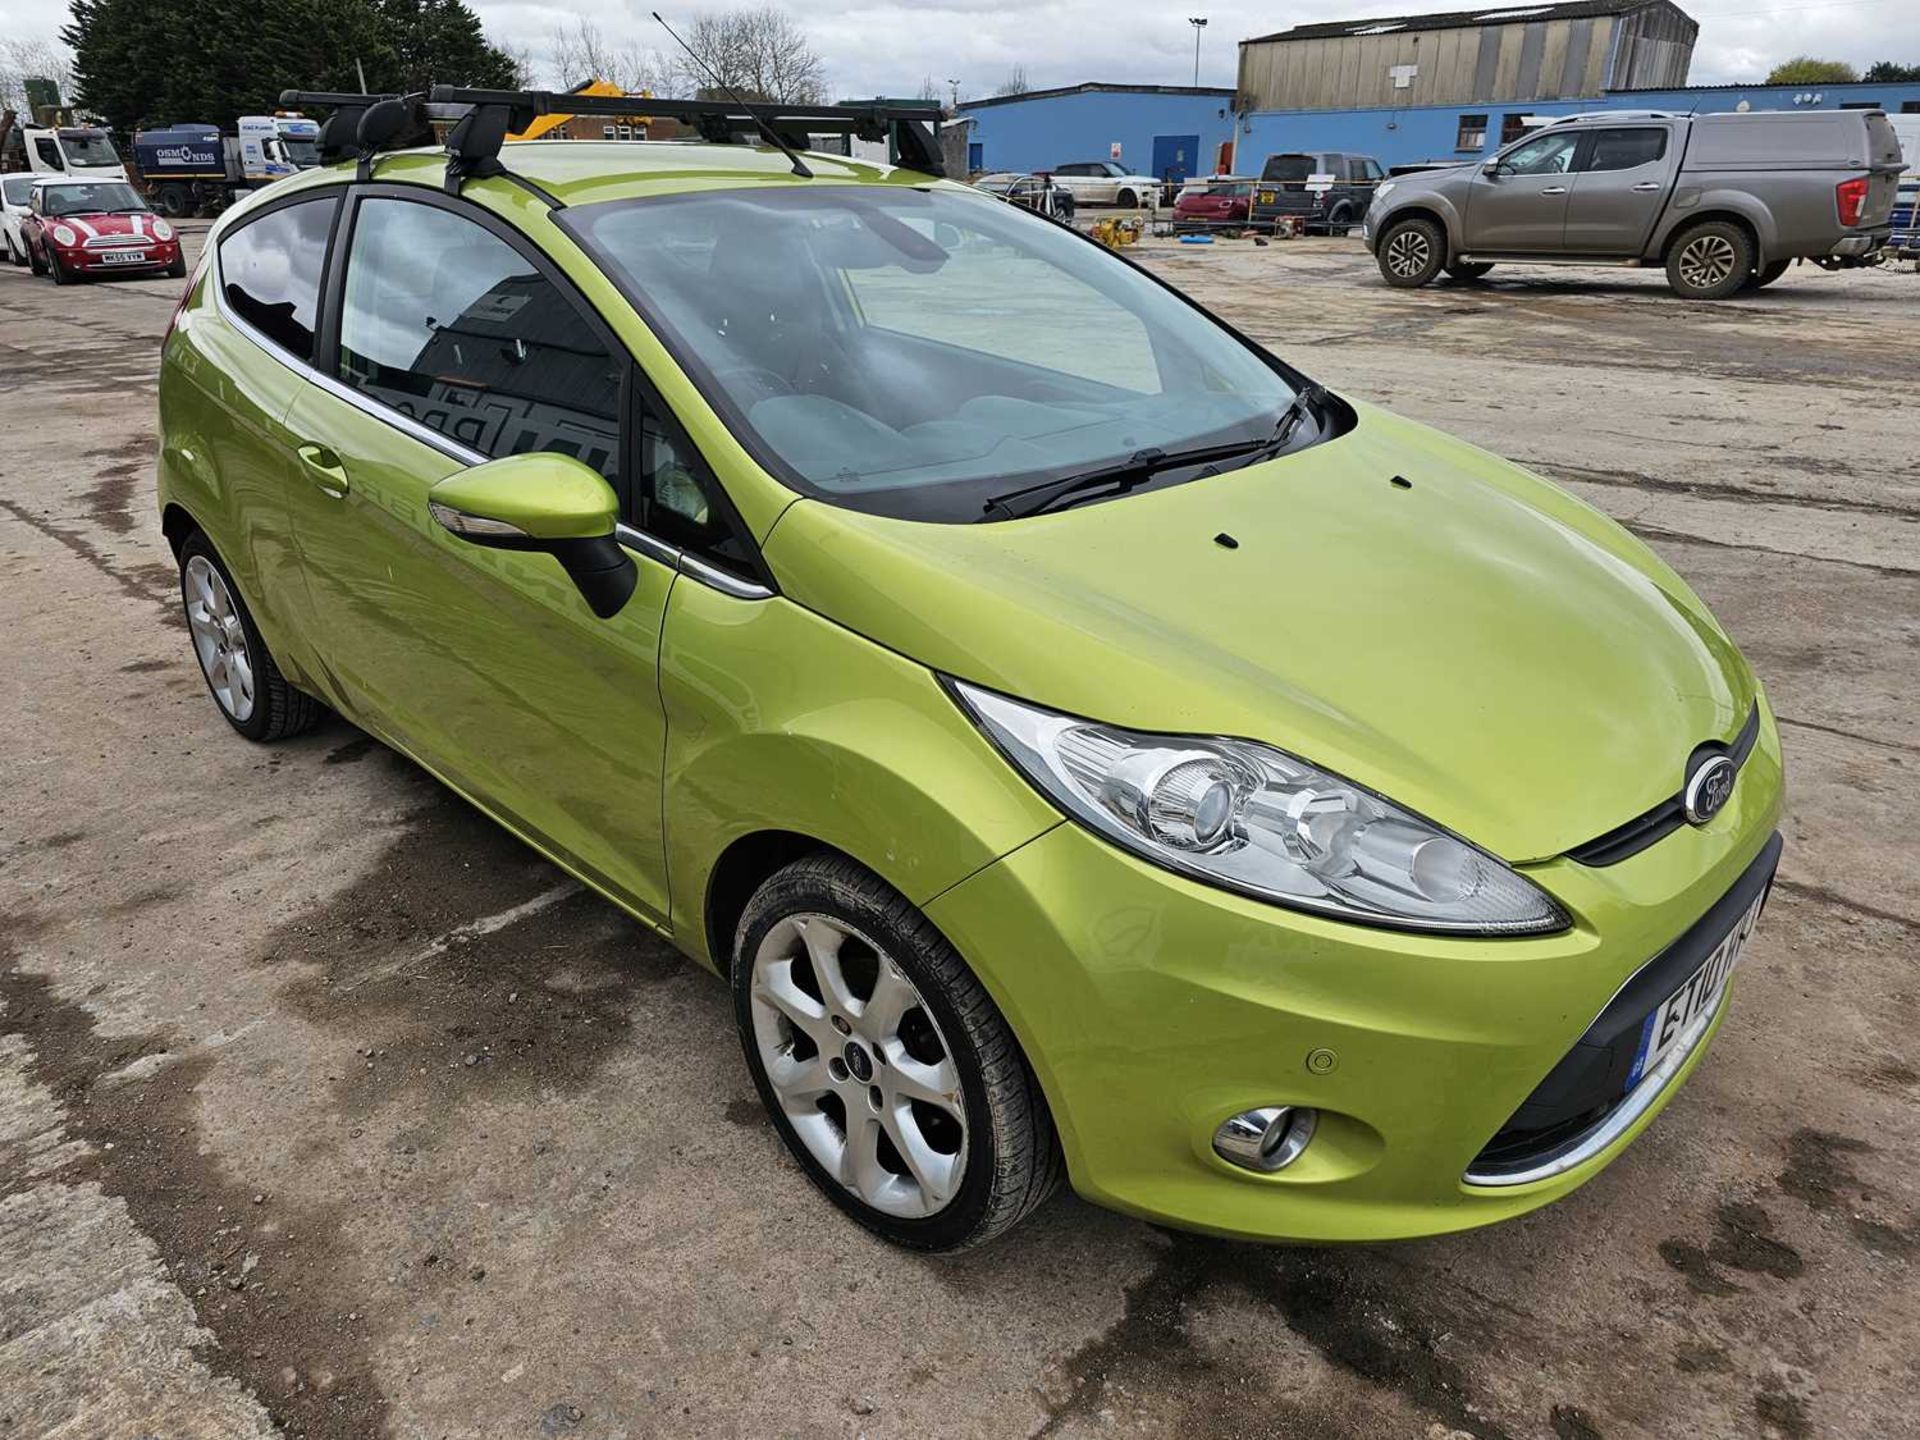 2010 Ford Fiesta Titanium, 5 Speed, Cruise Control, A/C (Reg. Docs. & Service History Available) - Image 7 of 25